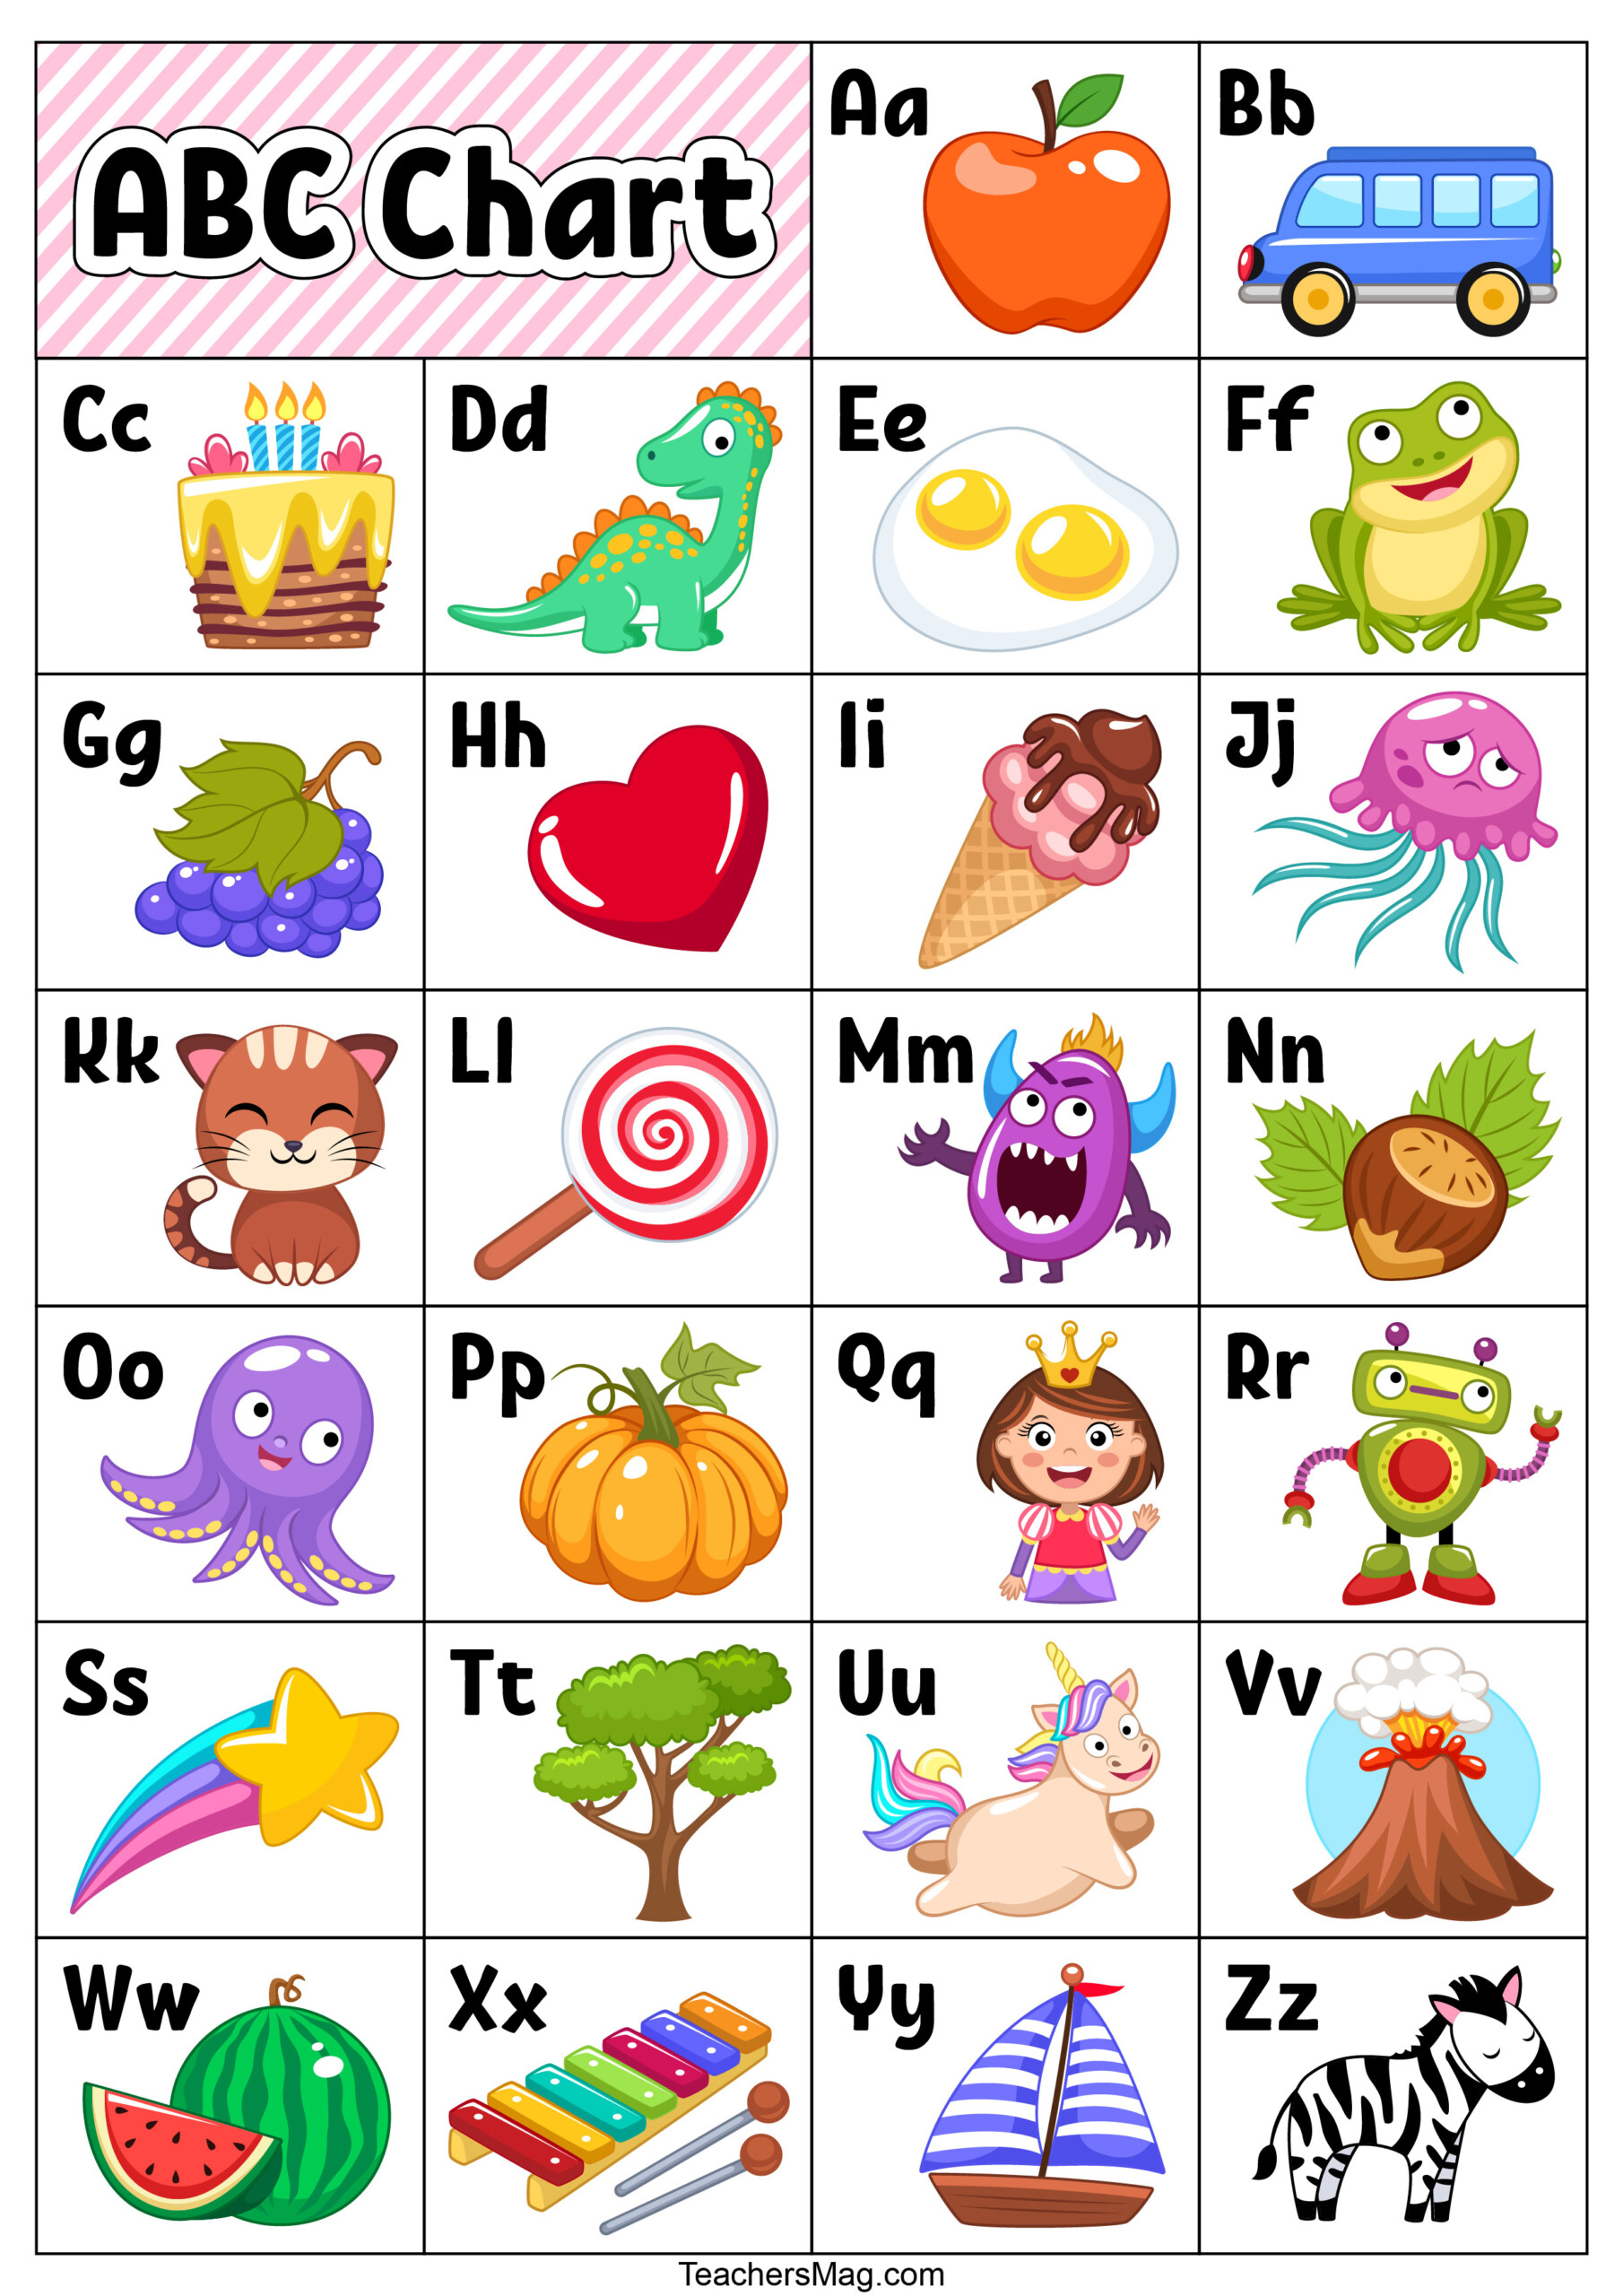 Free Chart And Flash Cards For Learning The Alphabet